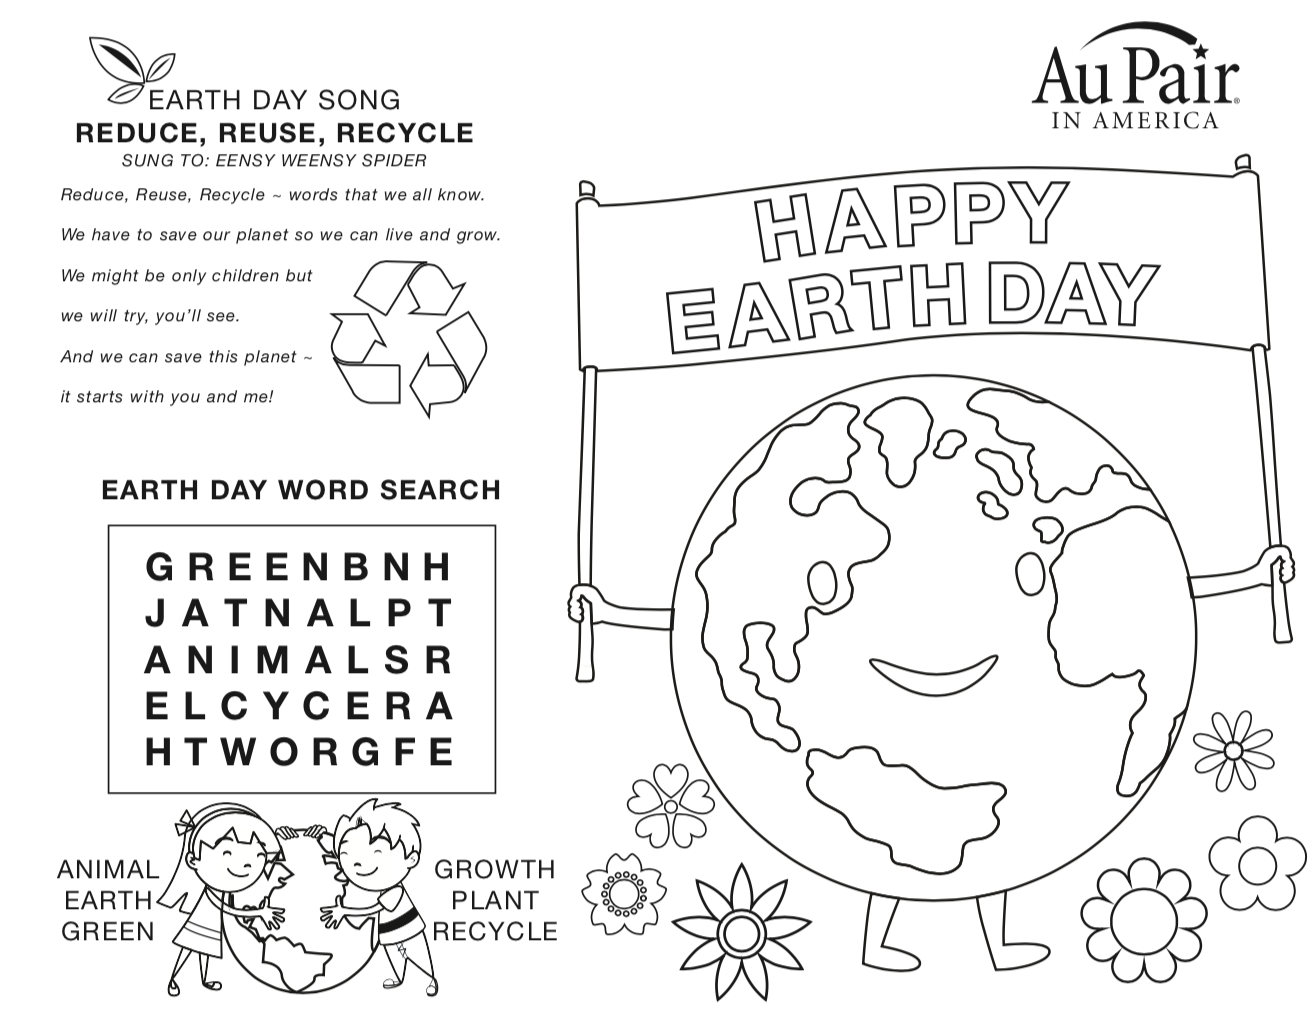 Earth Day Coloring Book Page | Au Pair in America